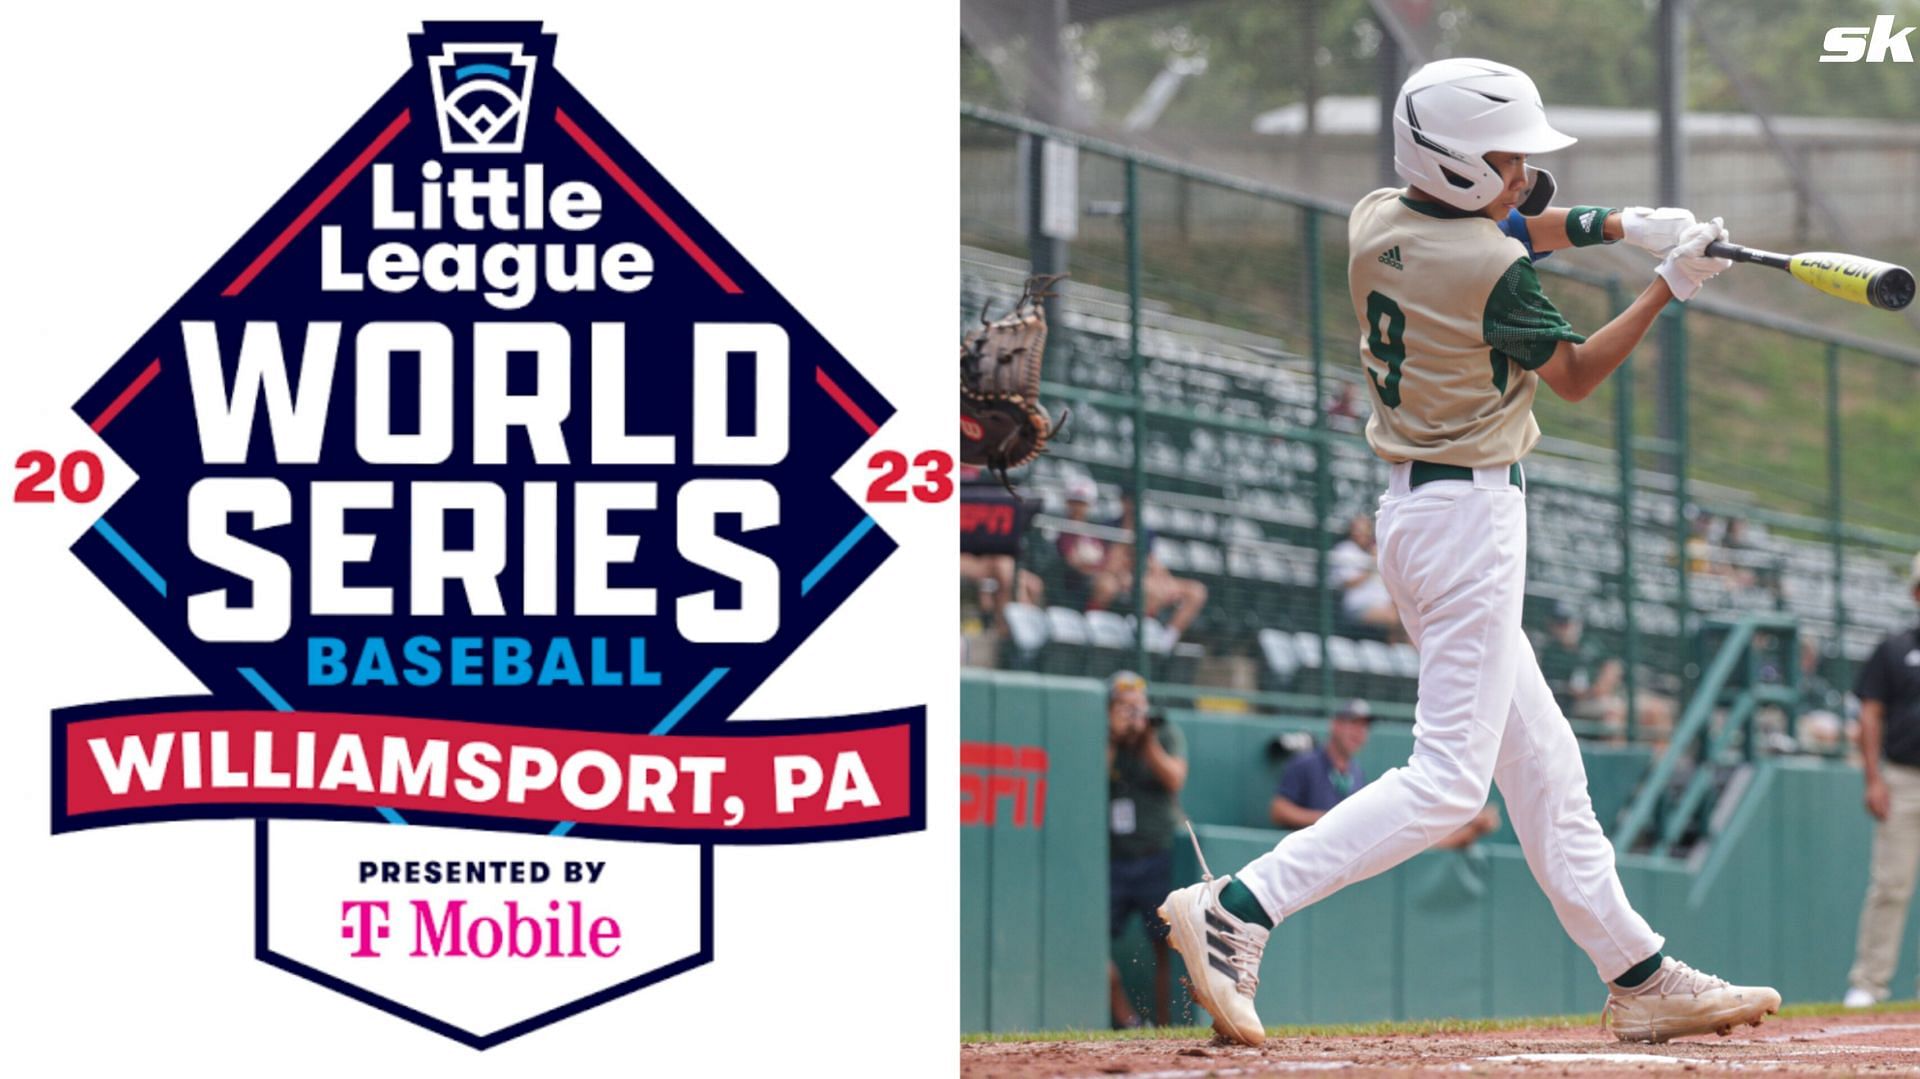 West vs Great Lakes Little League Baseball World Series 2023 Game 8 Venue, Start time, TV and streaming details